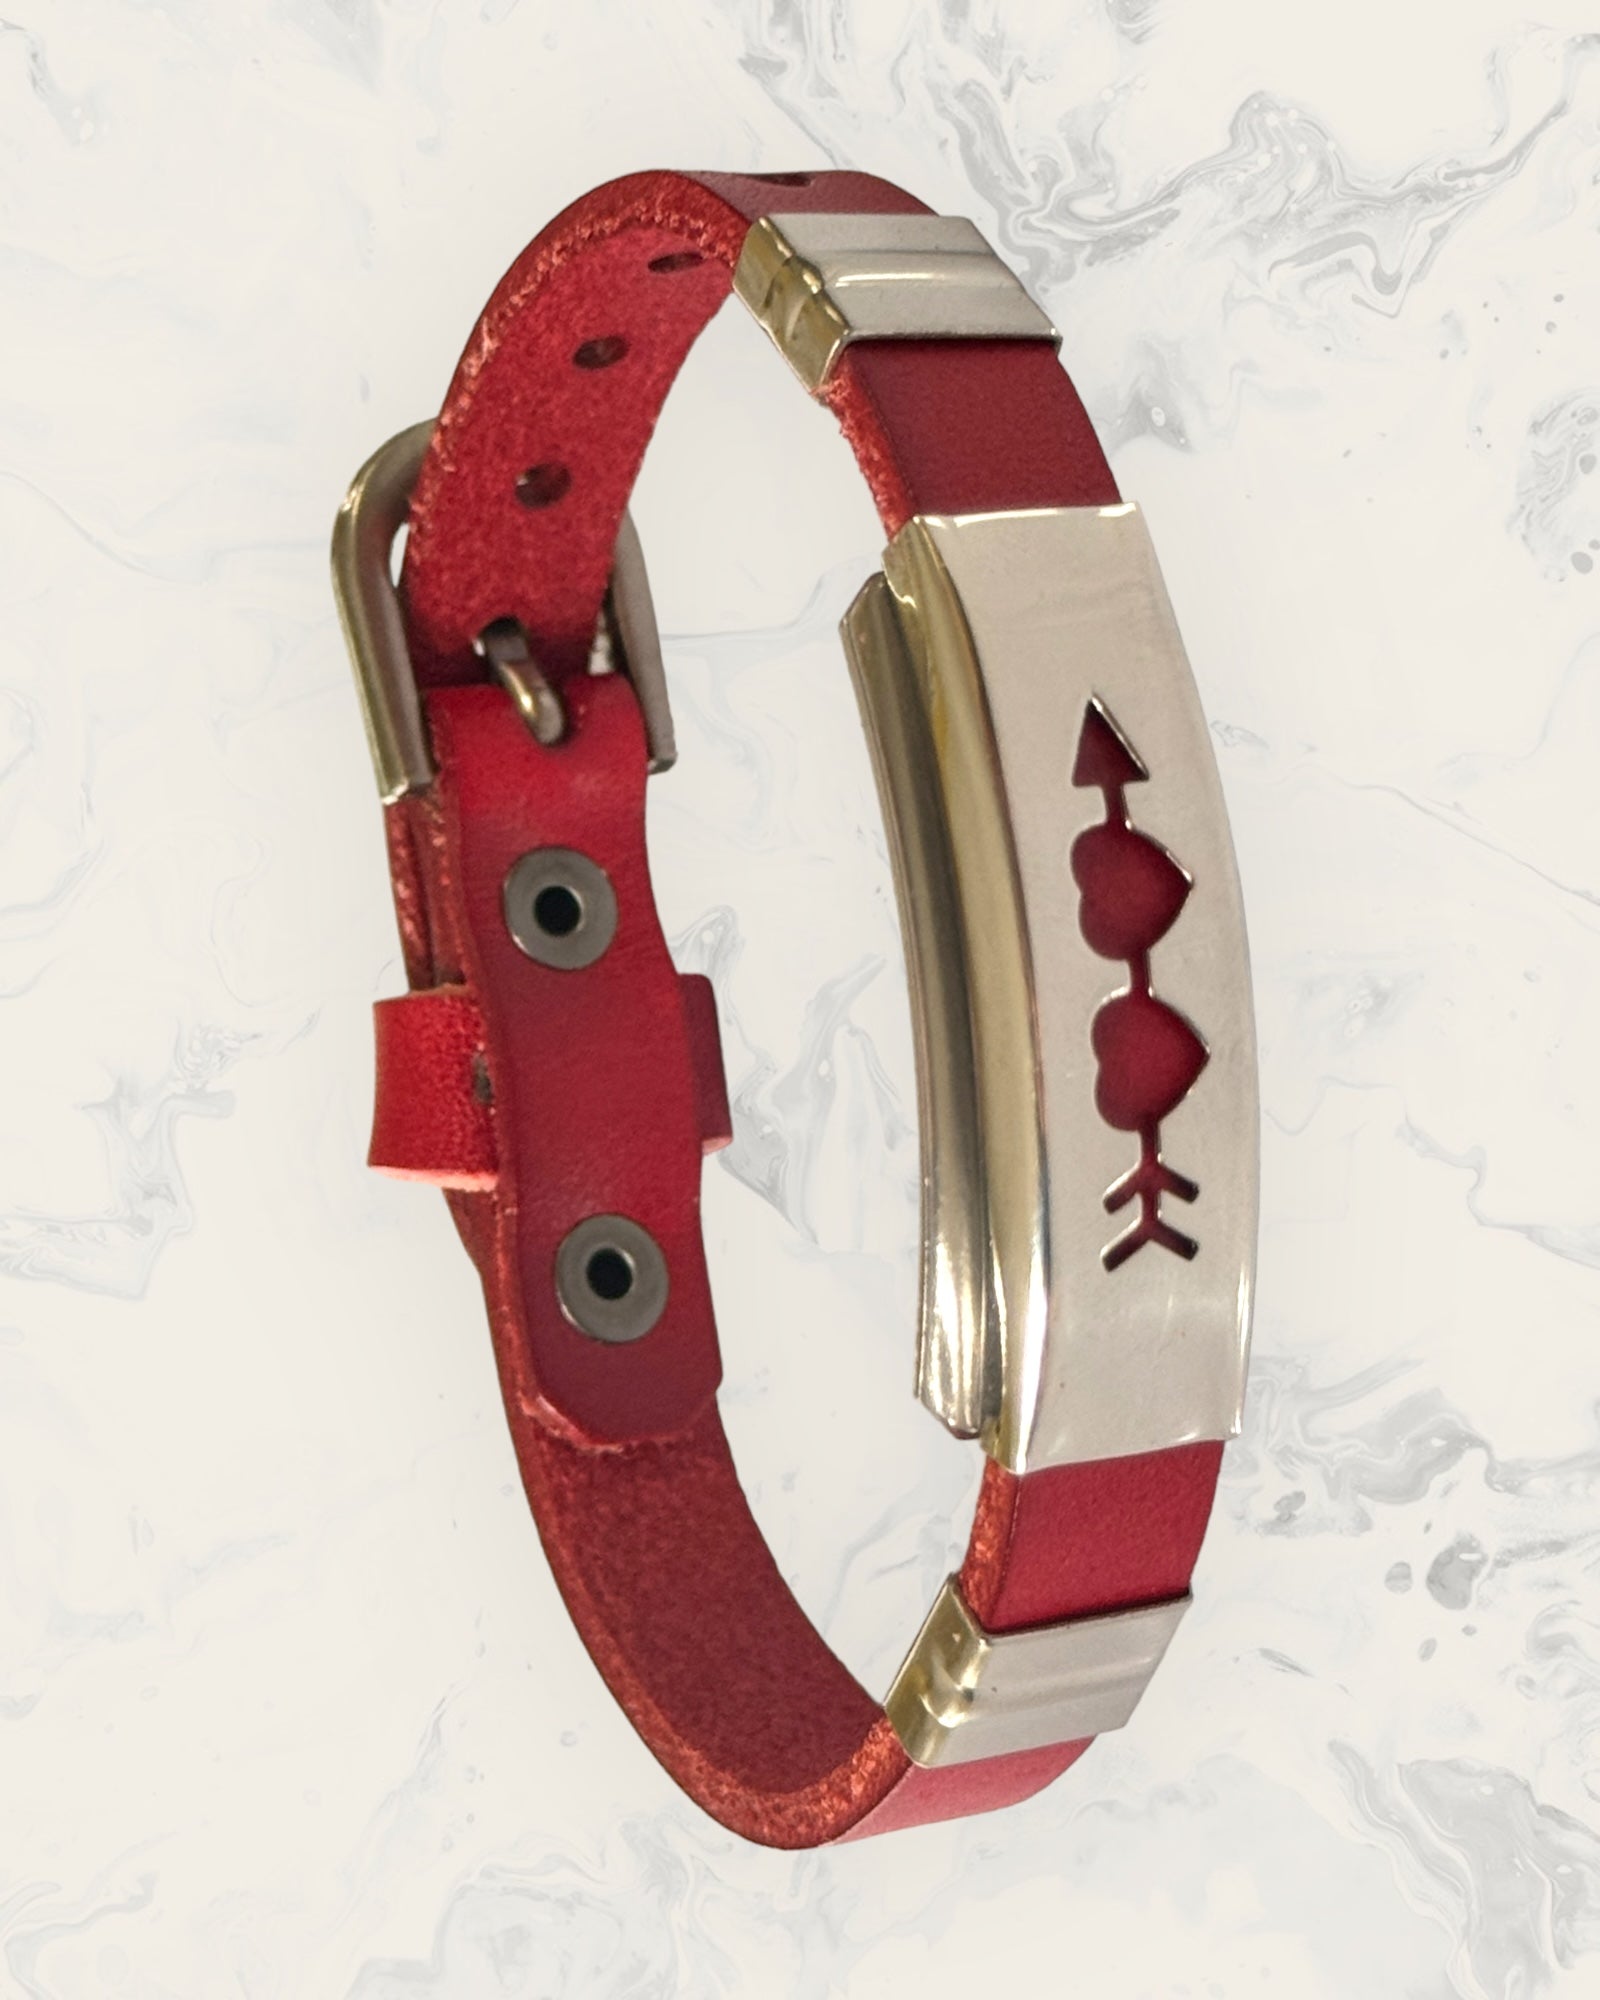 Natural Pain Relief and EMF Protection Bracelet Leather Band Color Red with Two Hearts with an Arrow design on a silver metal slider